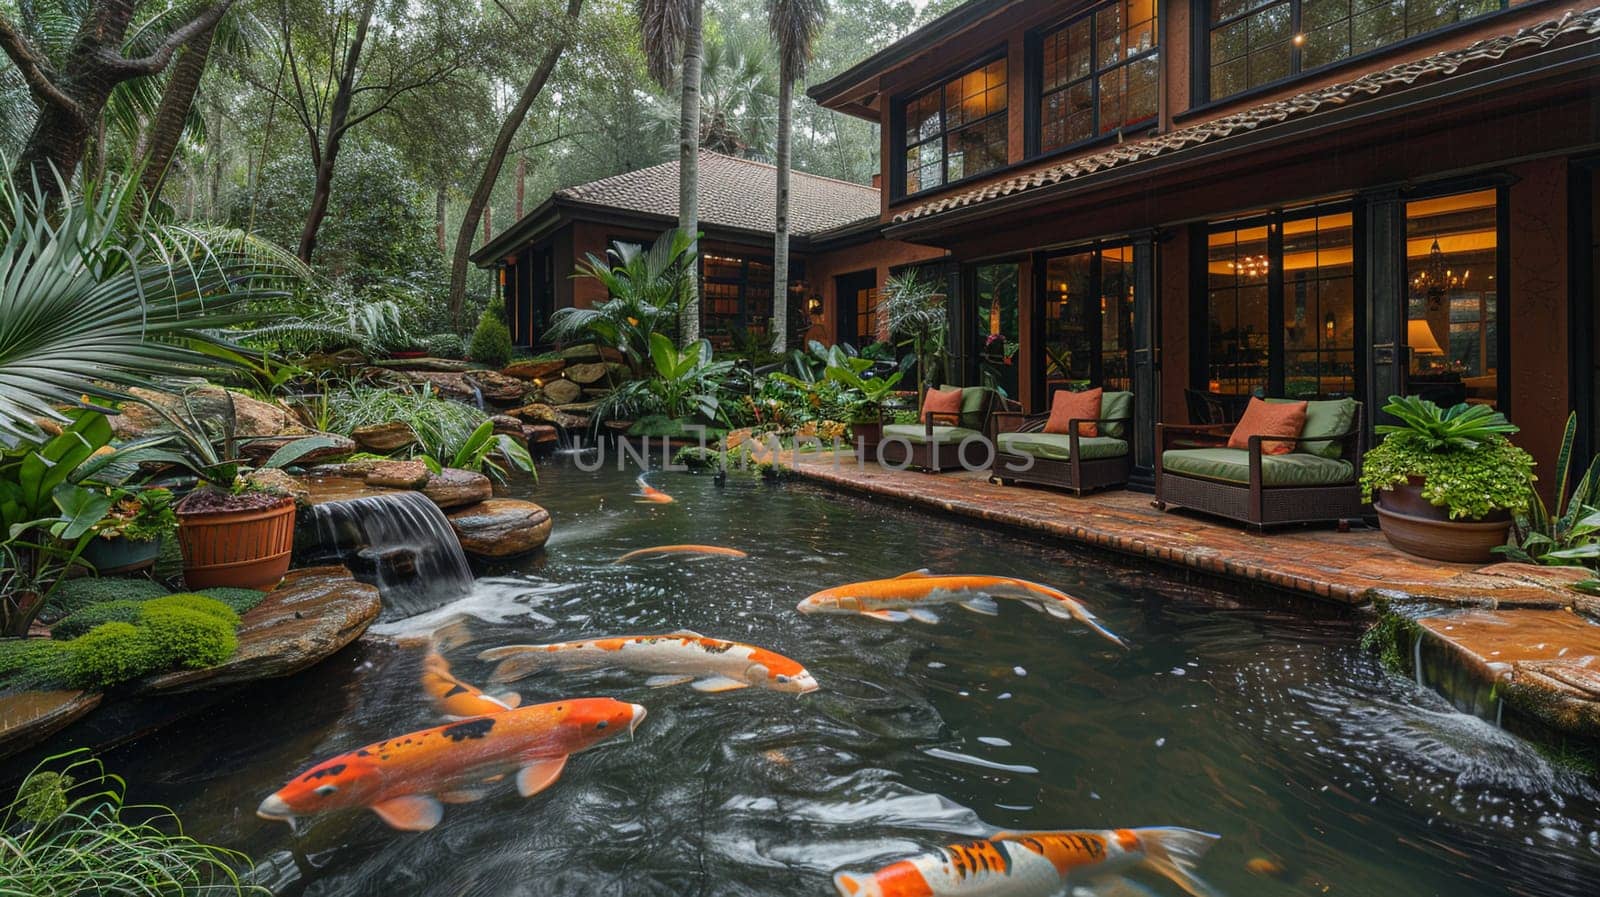 Tranquil koi pond with a surrounding sitting area and lush landscaping